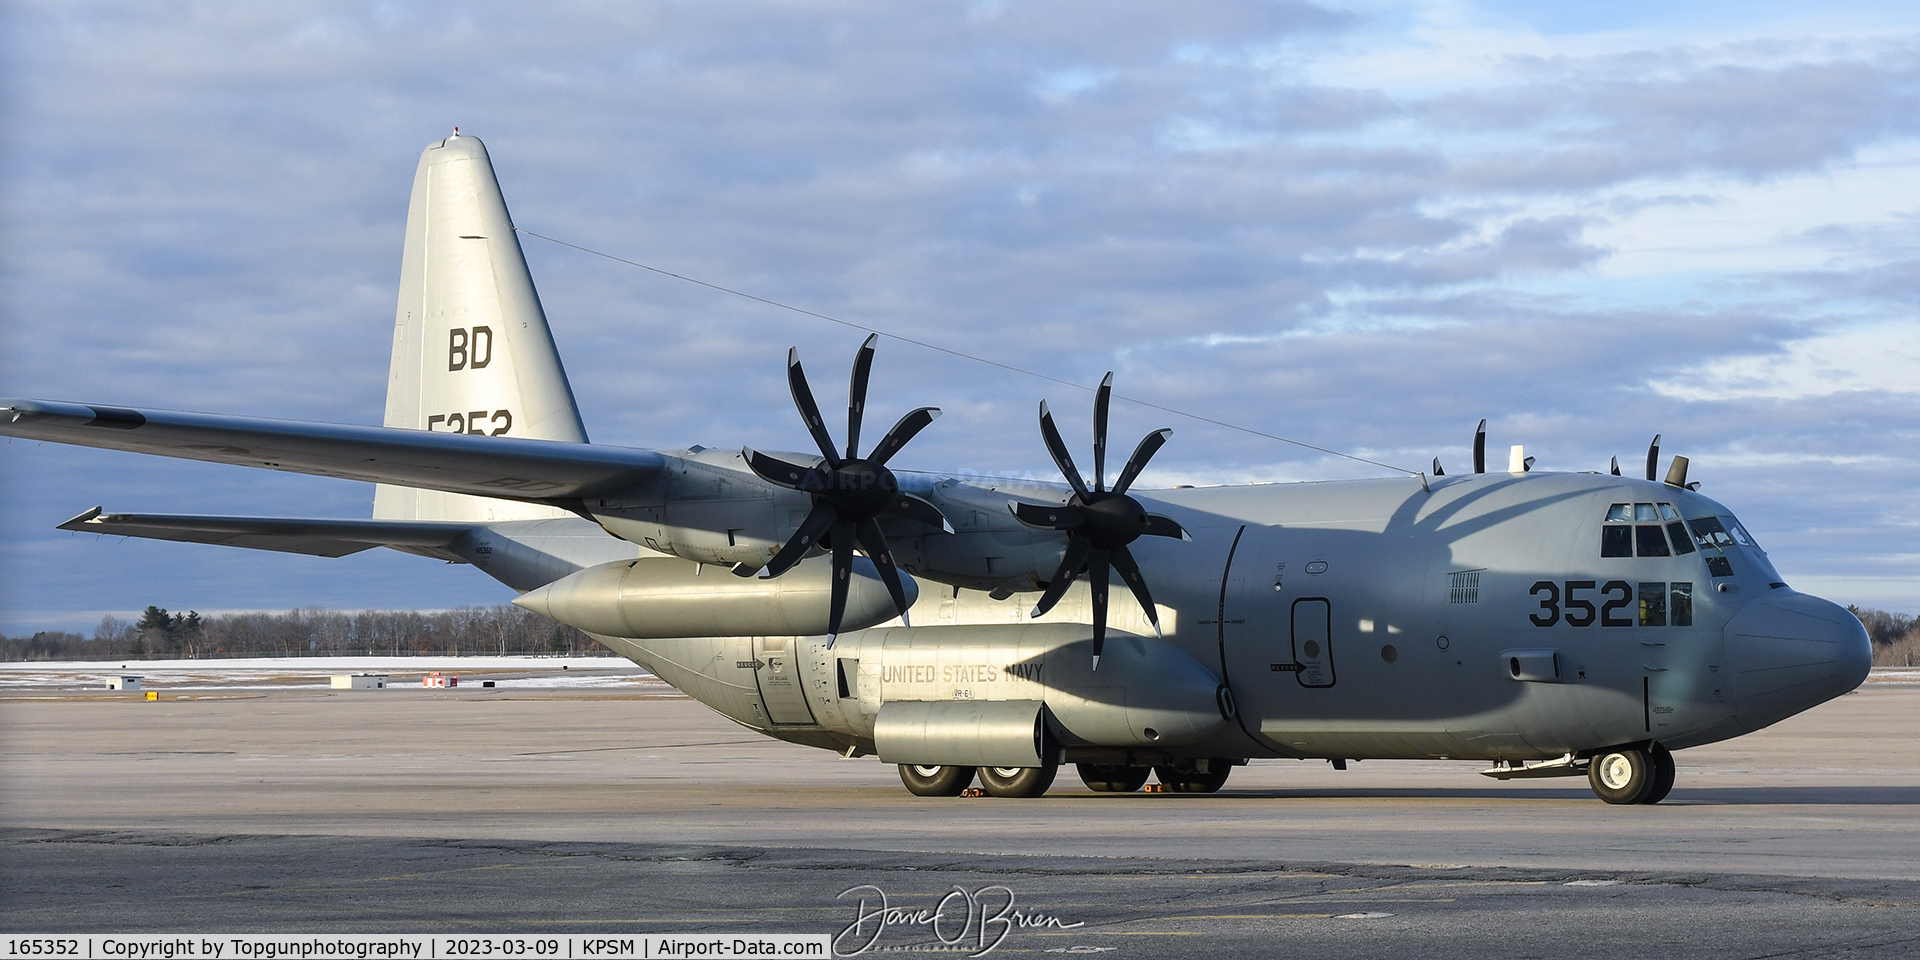 165352, Lockheed KC-130T Hercules C/N 382-5411, CONVOY3191 rests on the ramp after a late night arrival